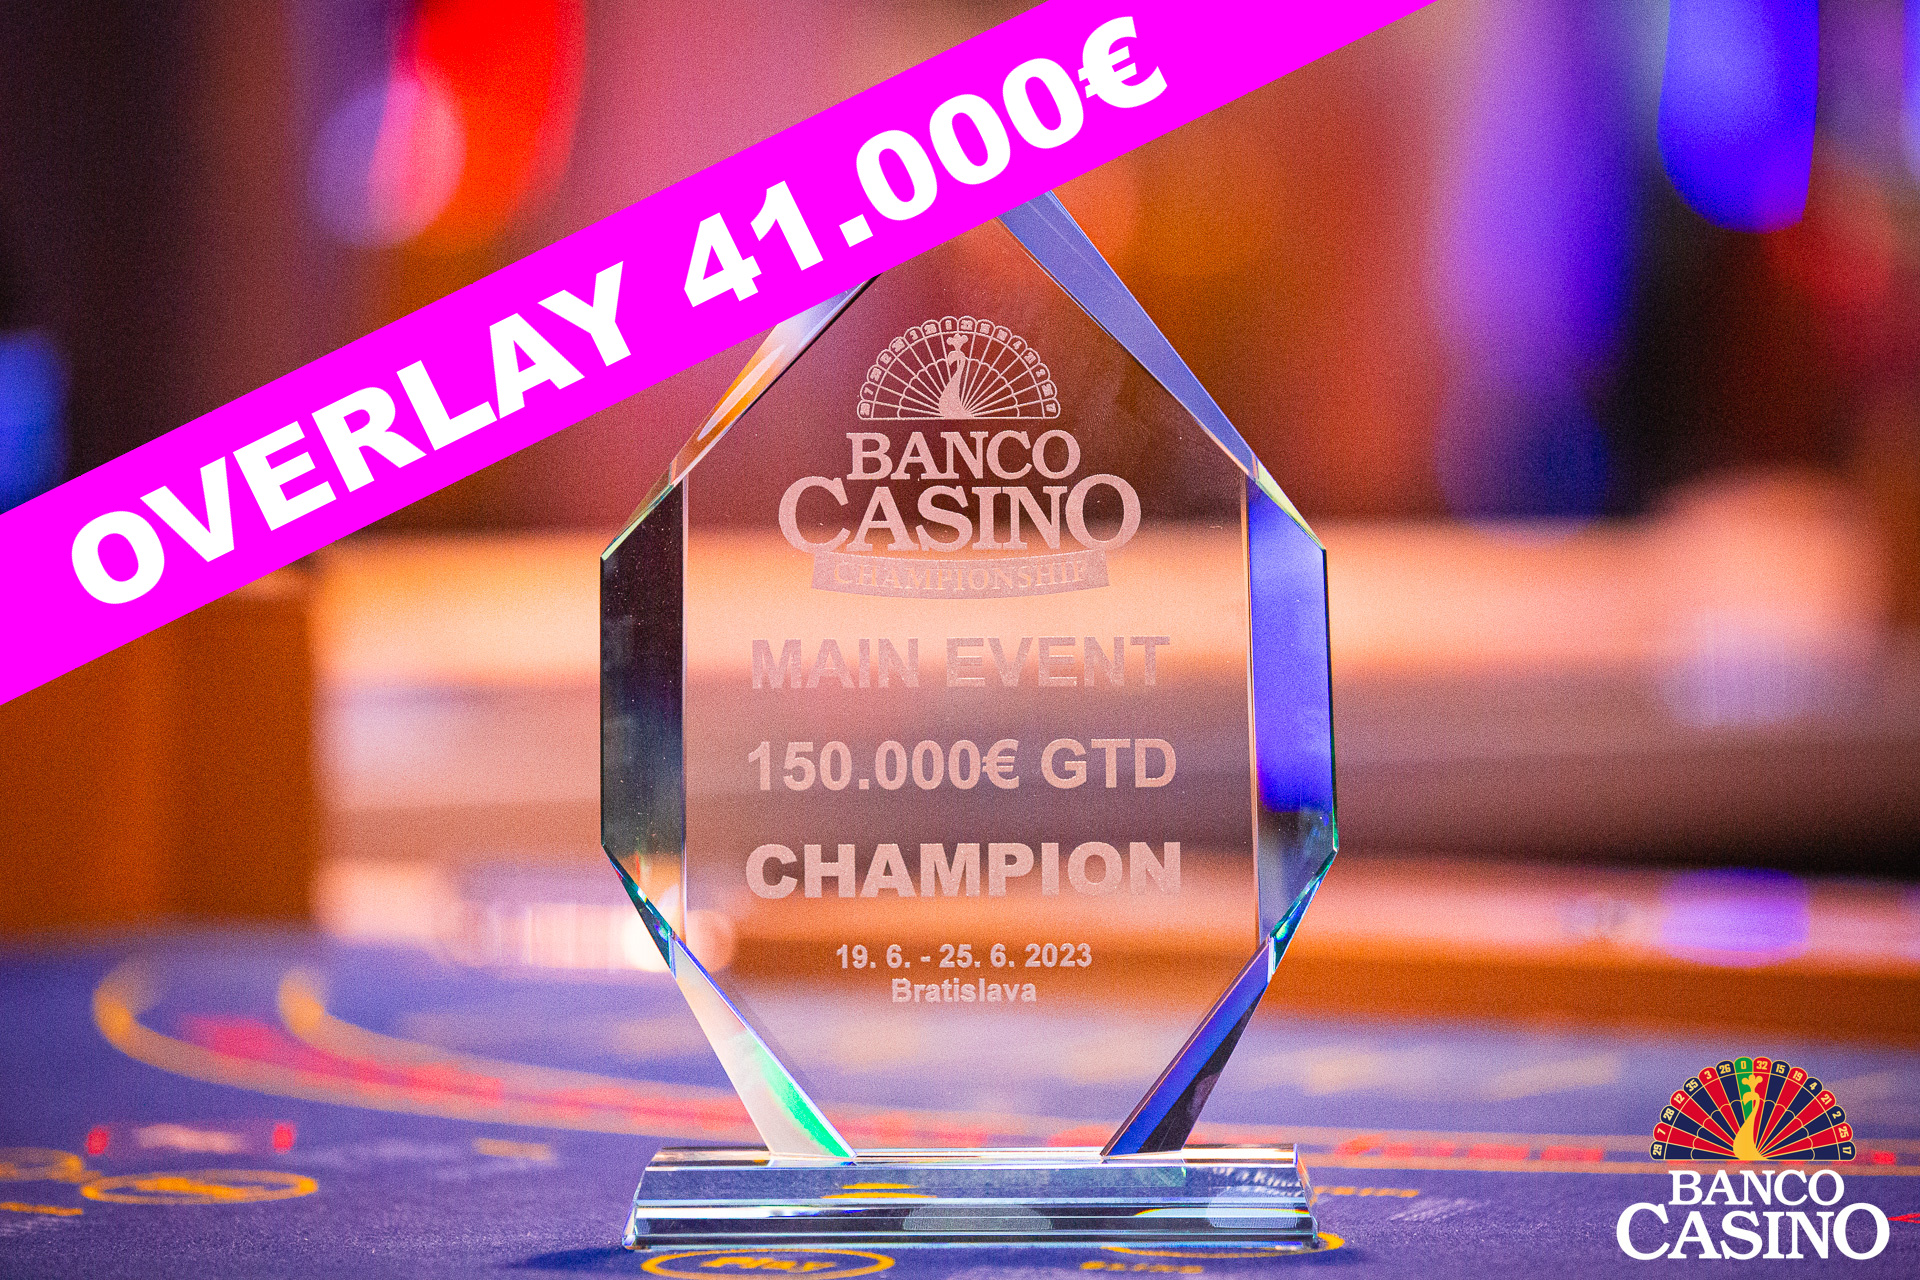 Banco Casino Championship 150,000€ GTD: 41,000€ missing from the guarantee before the last hyper turbo!